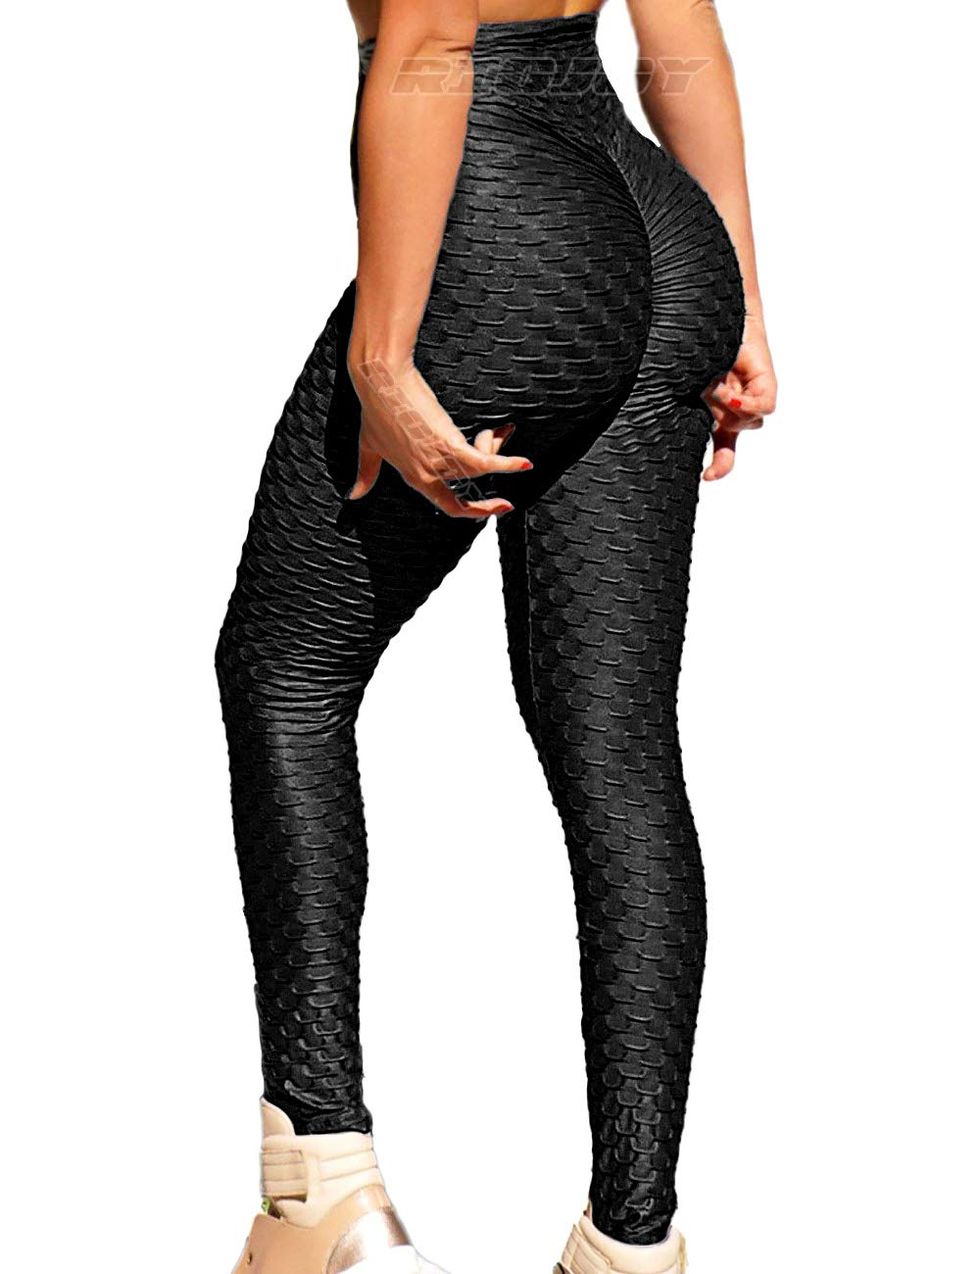 What Are The Leggings that Make Your Bum Look Good